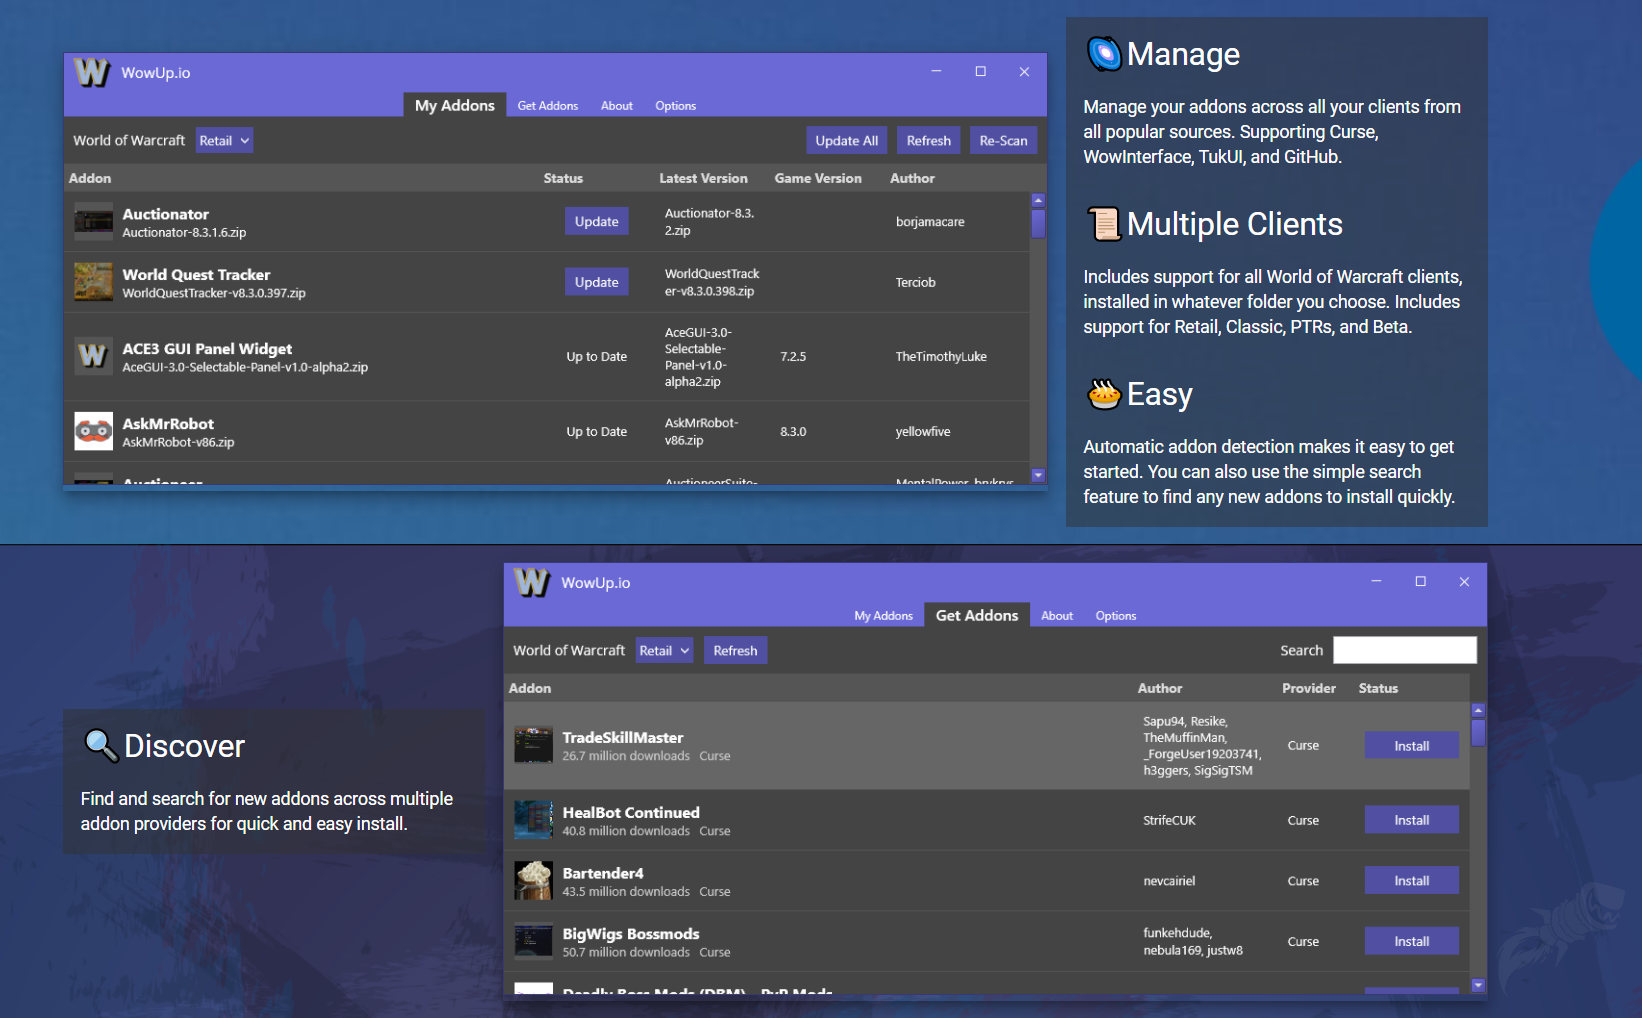 New Standalone CurseForge Client - Manage Addons without the Overwolf App -  Wowhead News